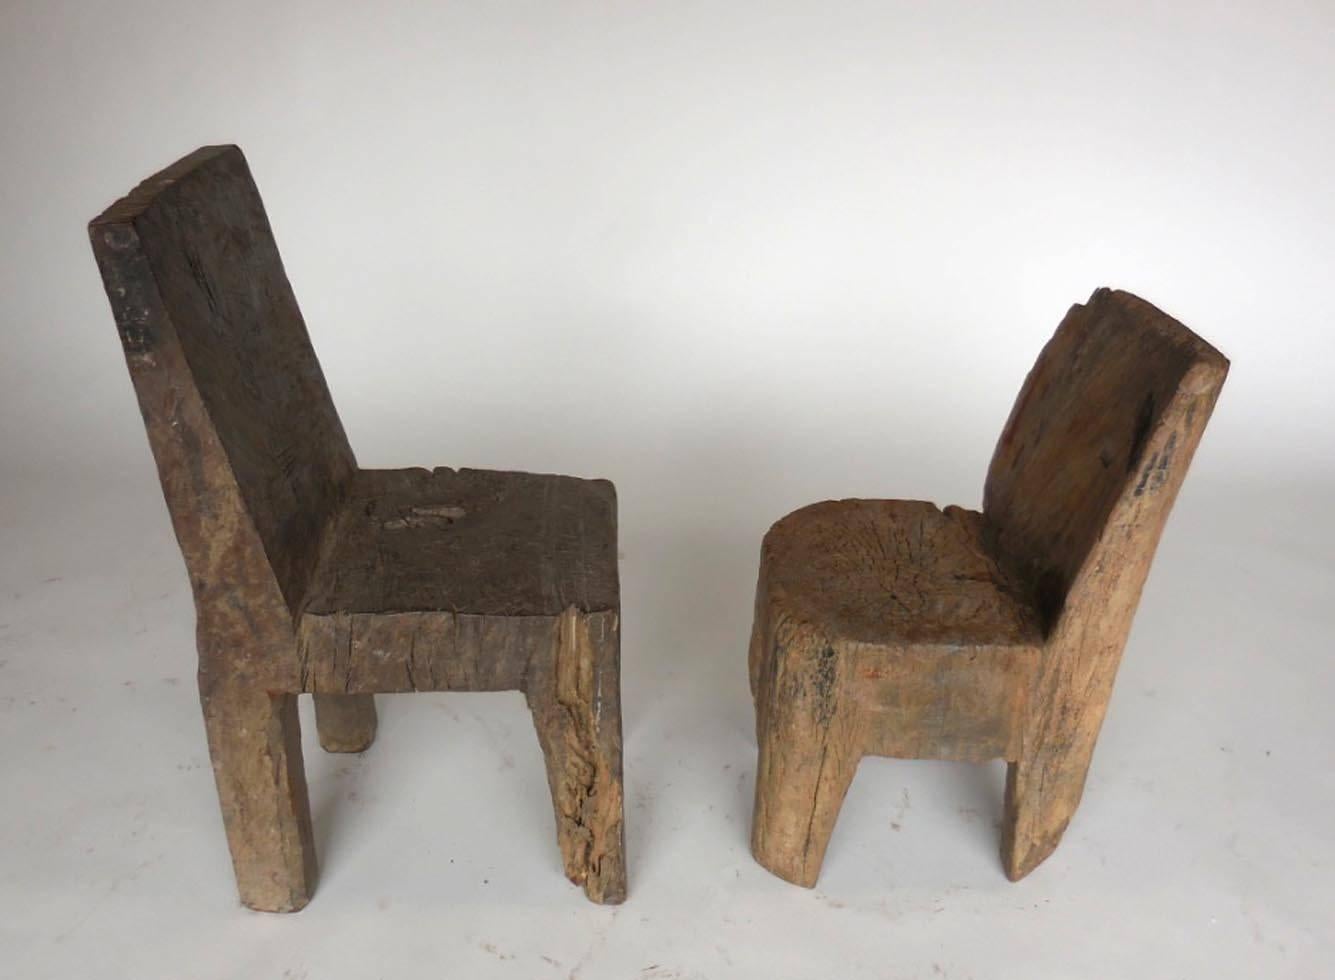 Primitive chairs carved from a tree trunk. Dense tropical wood. Hand hewn Primitive, modern shapes.
Left measures 13.5 x 17 x 31.5 H seat 15.5 $975 
right 14 x 15 x 25 H seat 14.5 H $515.
Can be sold individually.